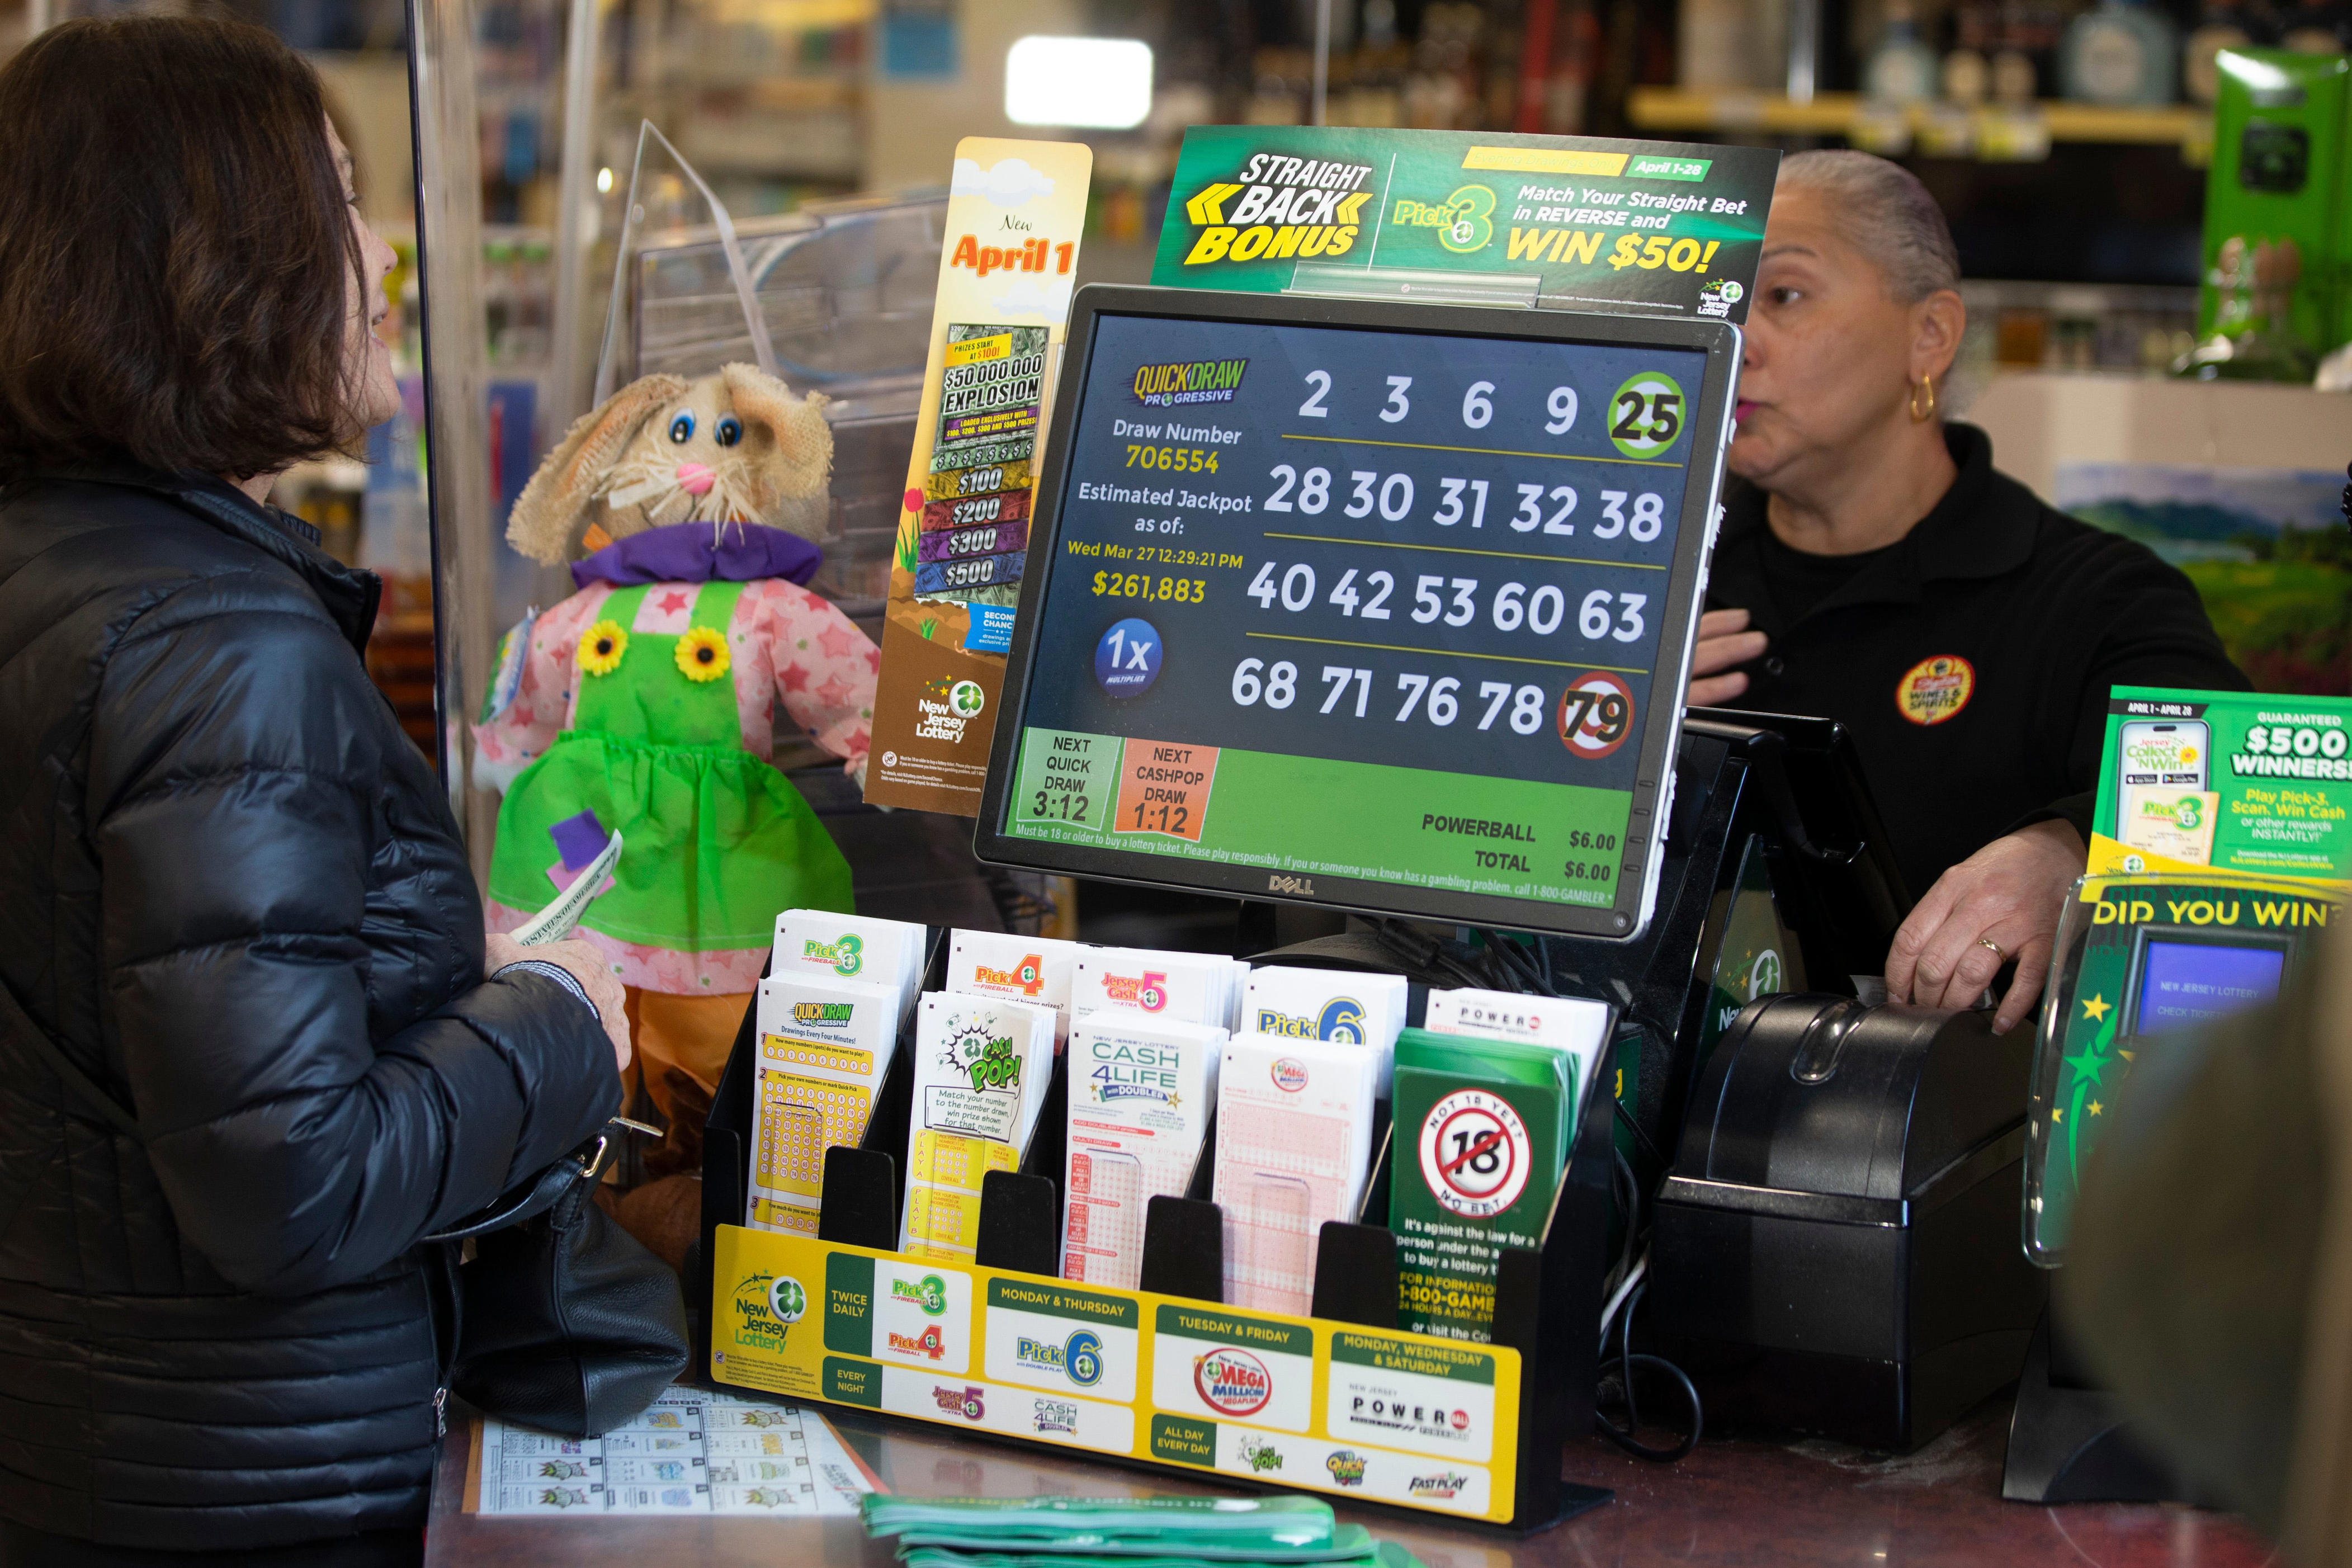 mega millions winning numbers for april 16 posted after delay caused by 'technical difficulties'